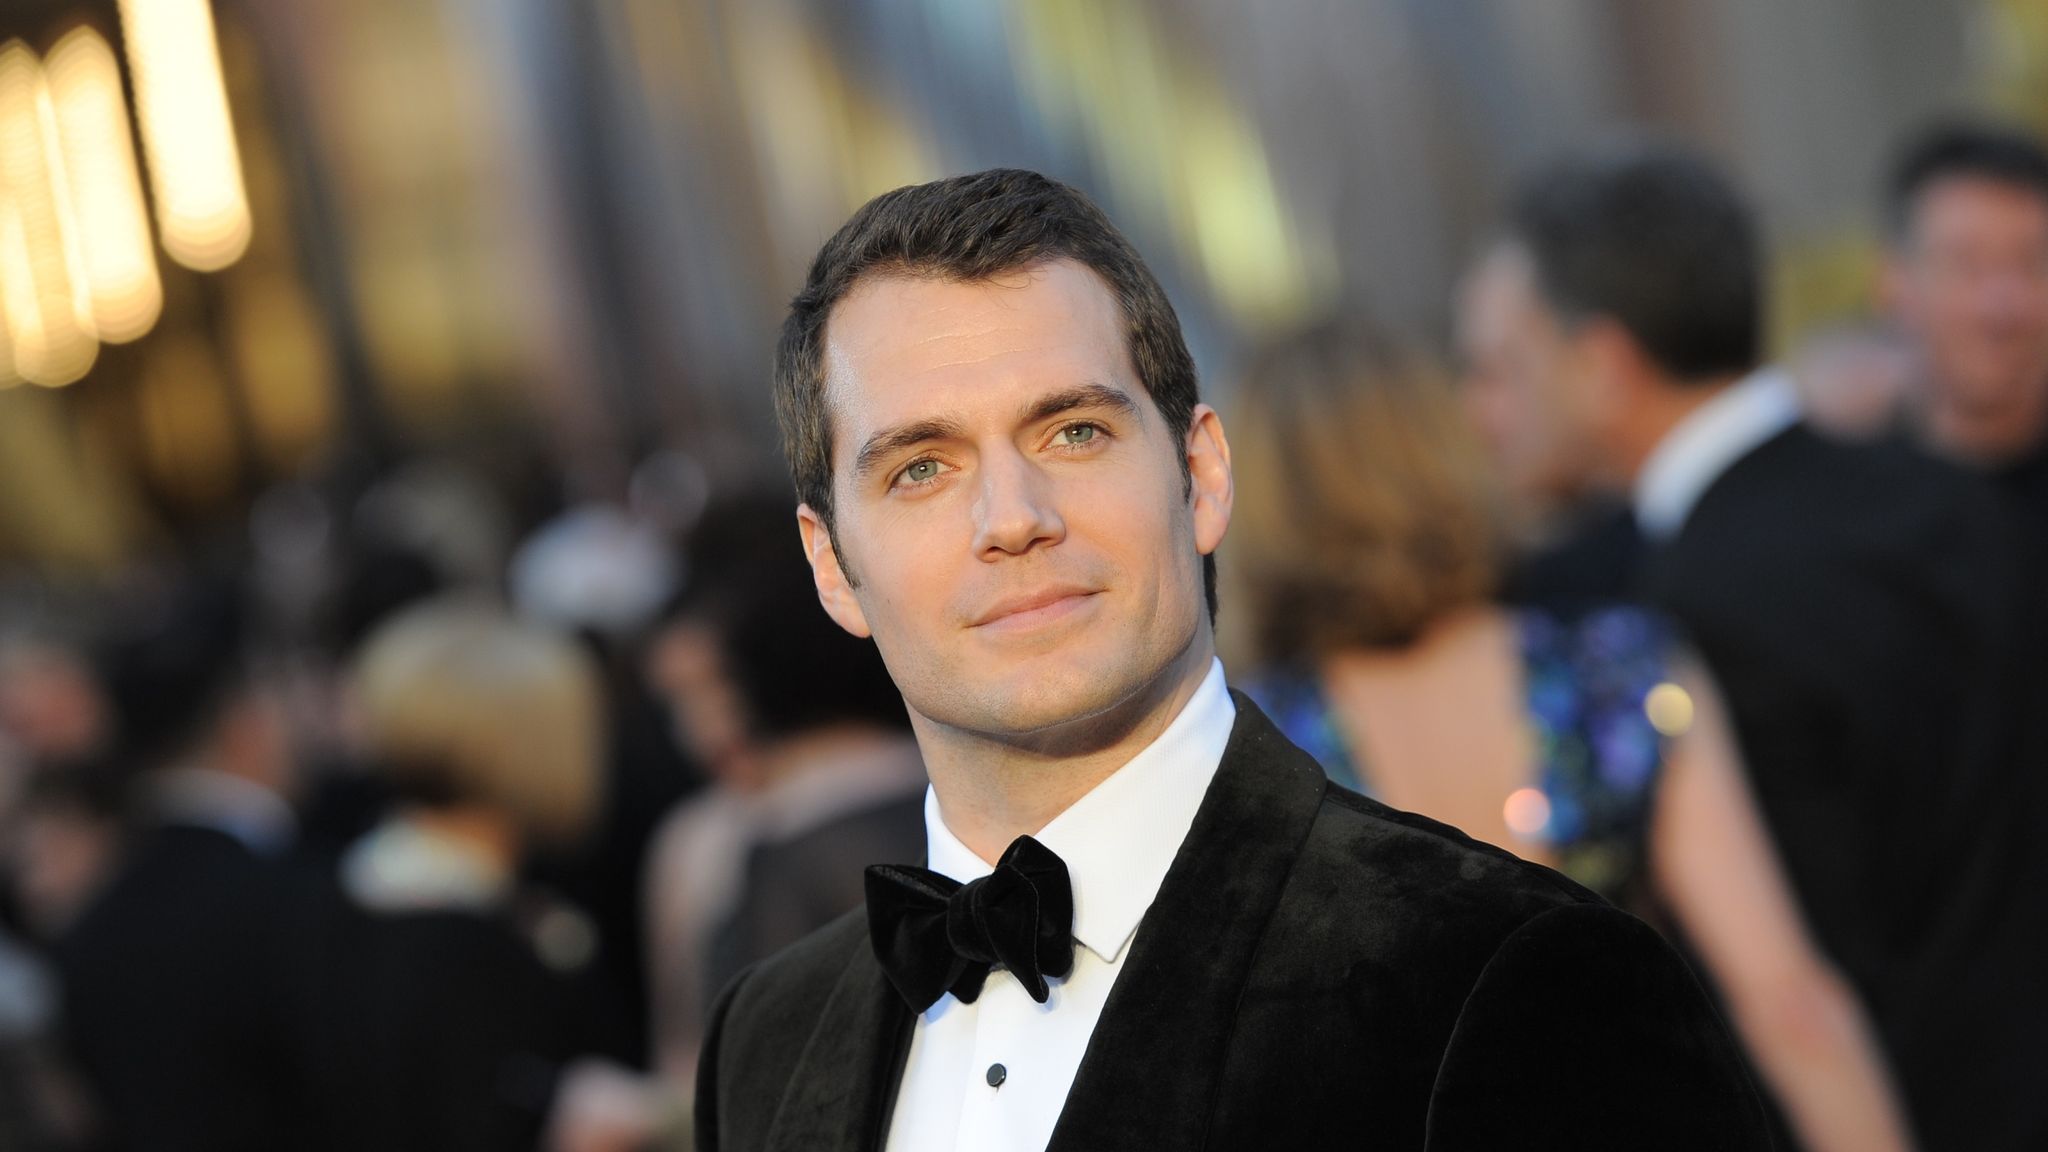 Henry Cavill cast in Mission Impossible after Instagram dare.